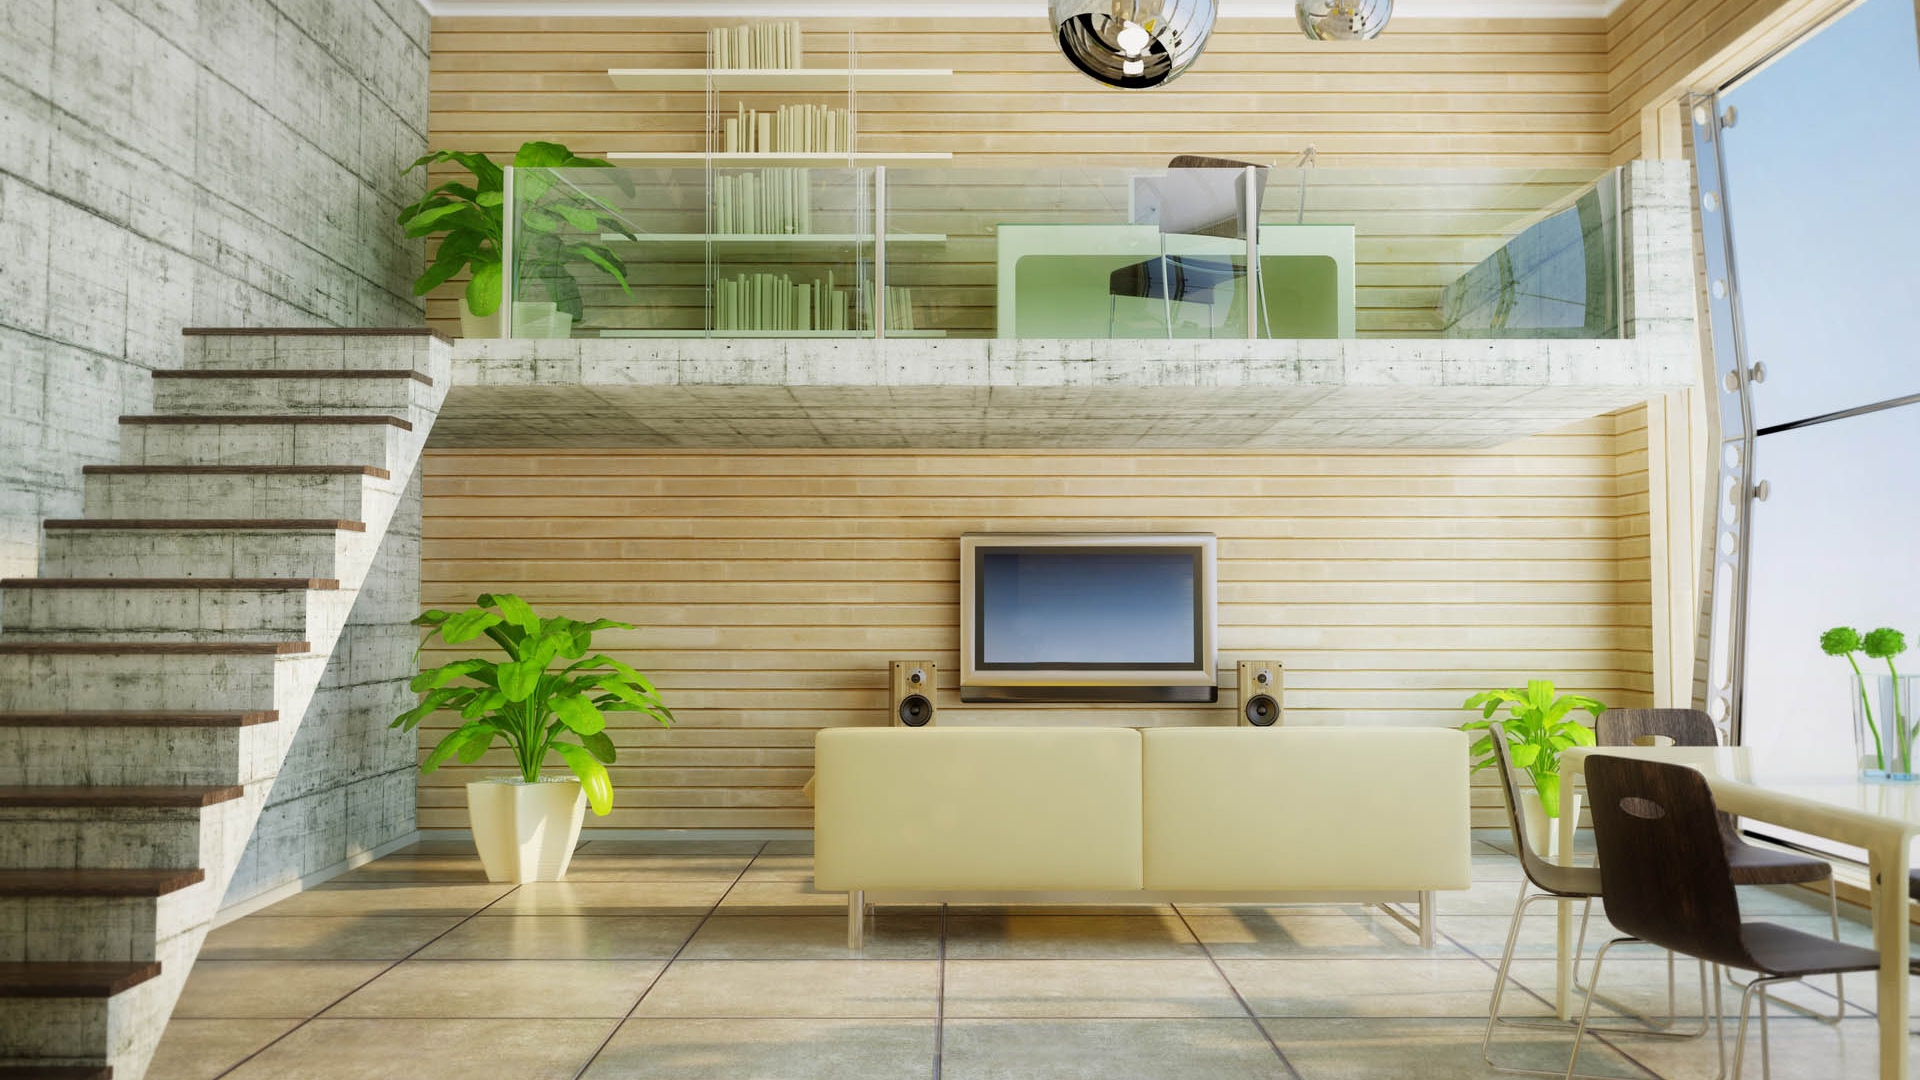 Image: Stairs, plants, sofa, chairs, shelves, TV, speakers, window